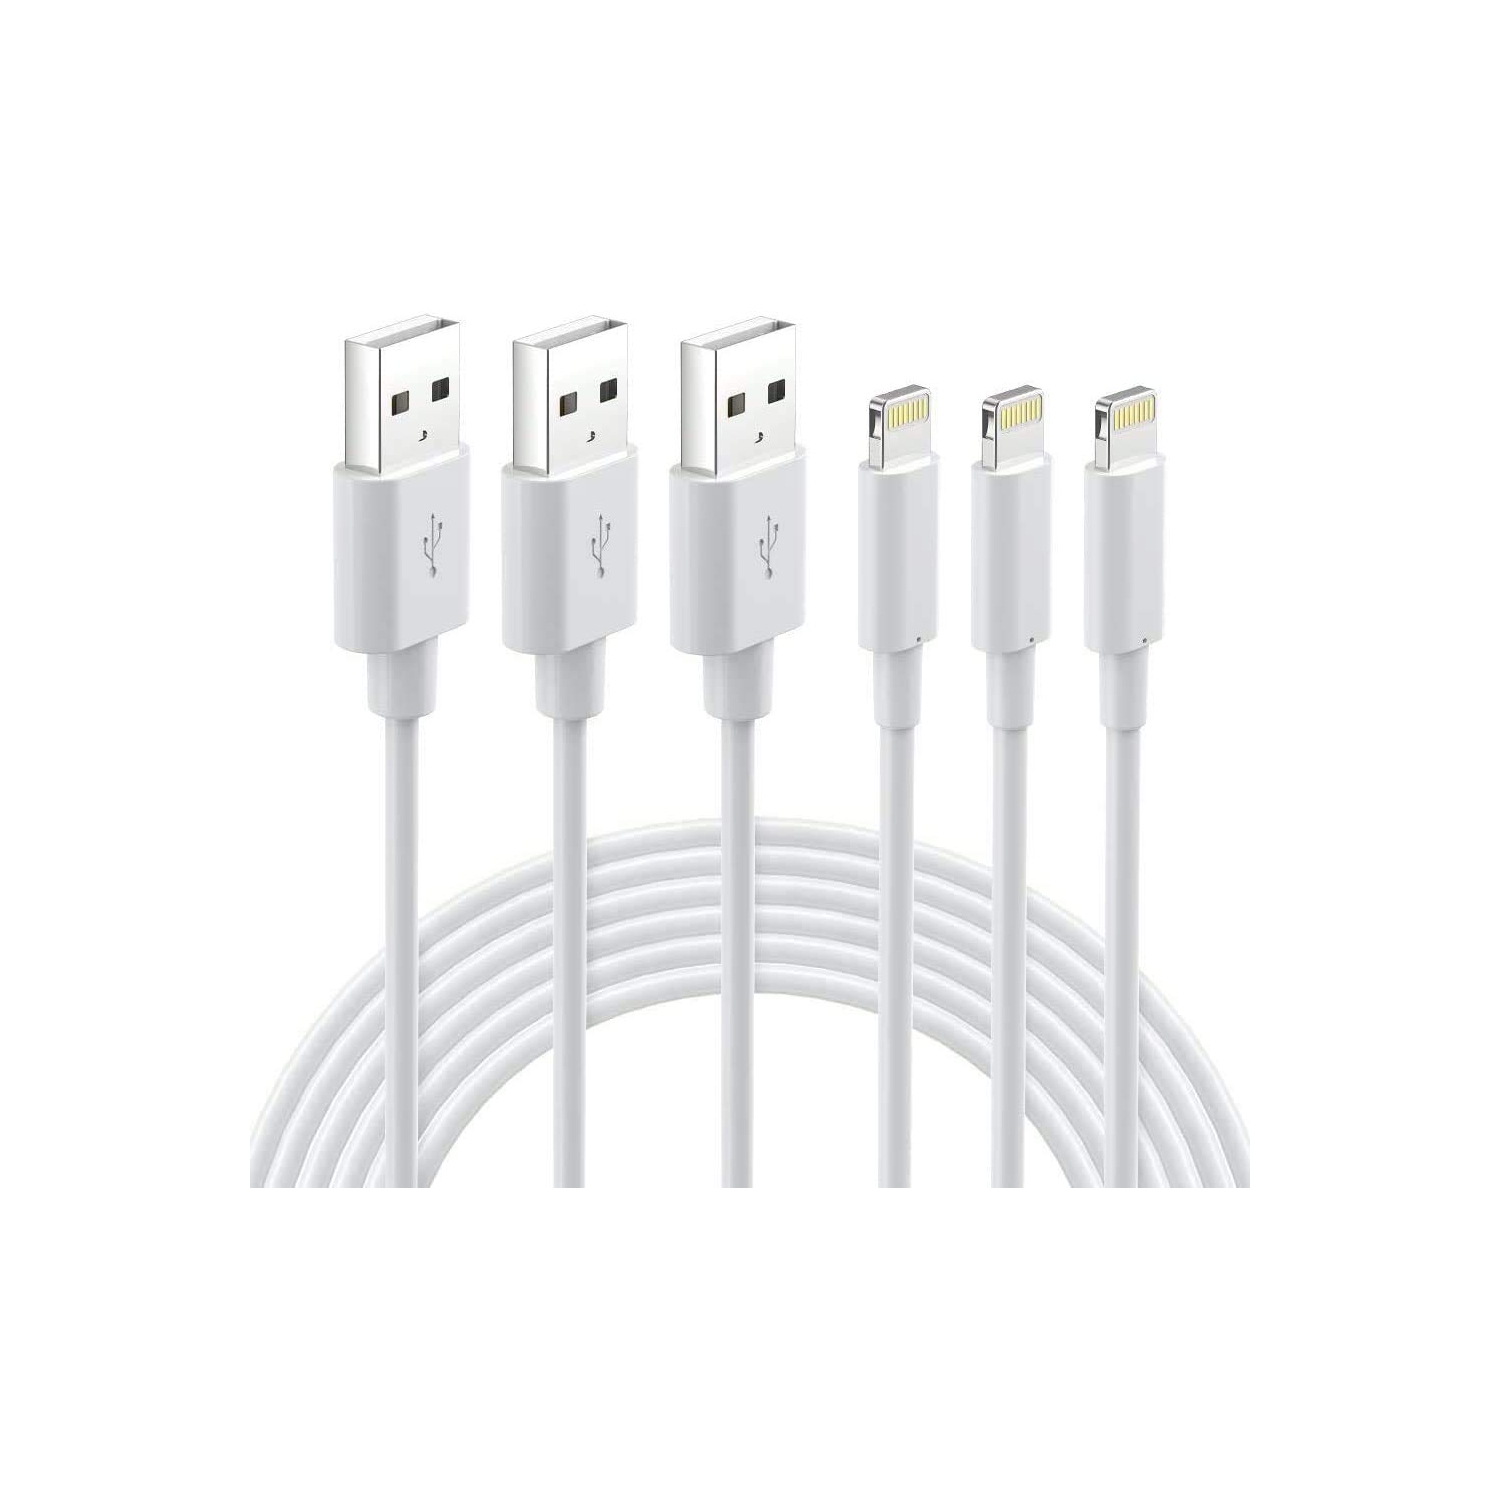 iPhone Charger Cable - N 3Pack 3FT iPhone iPad Charger Cord - Mfi Certified Lightning USB A Charging Cable for iPhone 14 13 12 SE 11 Xs Max XR X 8 7 6s Plus 5S iPad Mini iPod Airp